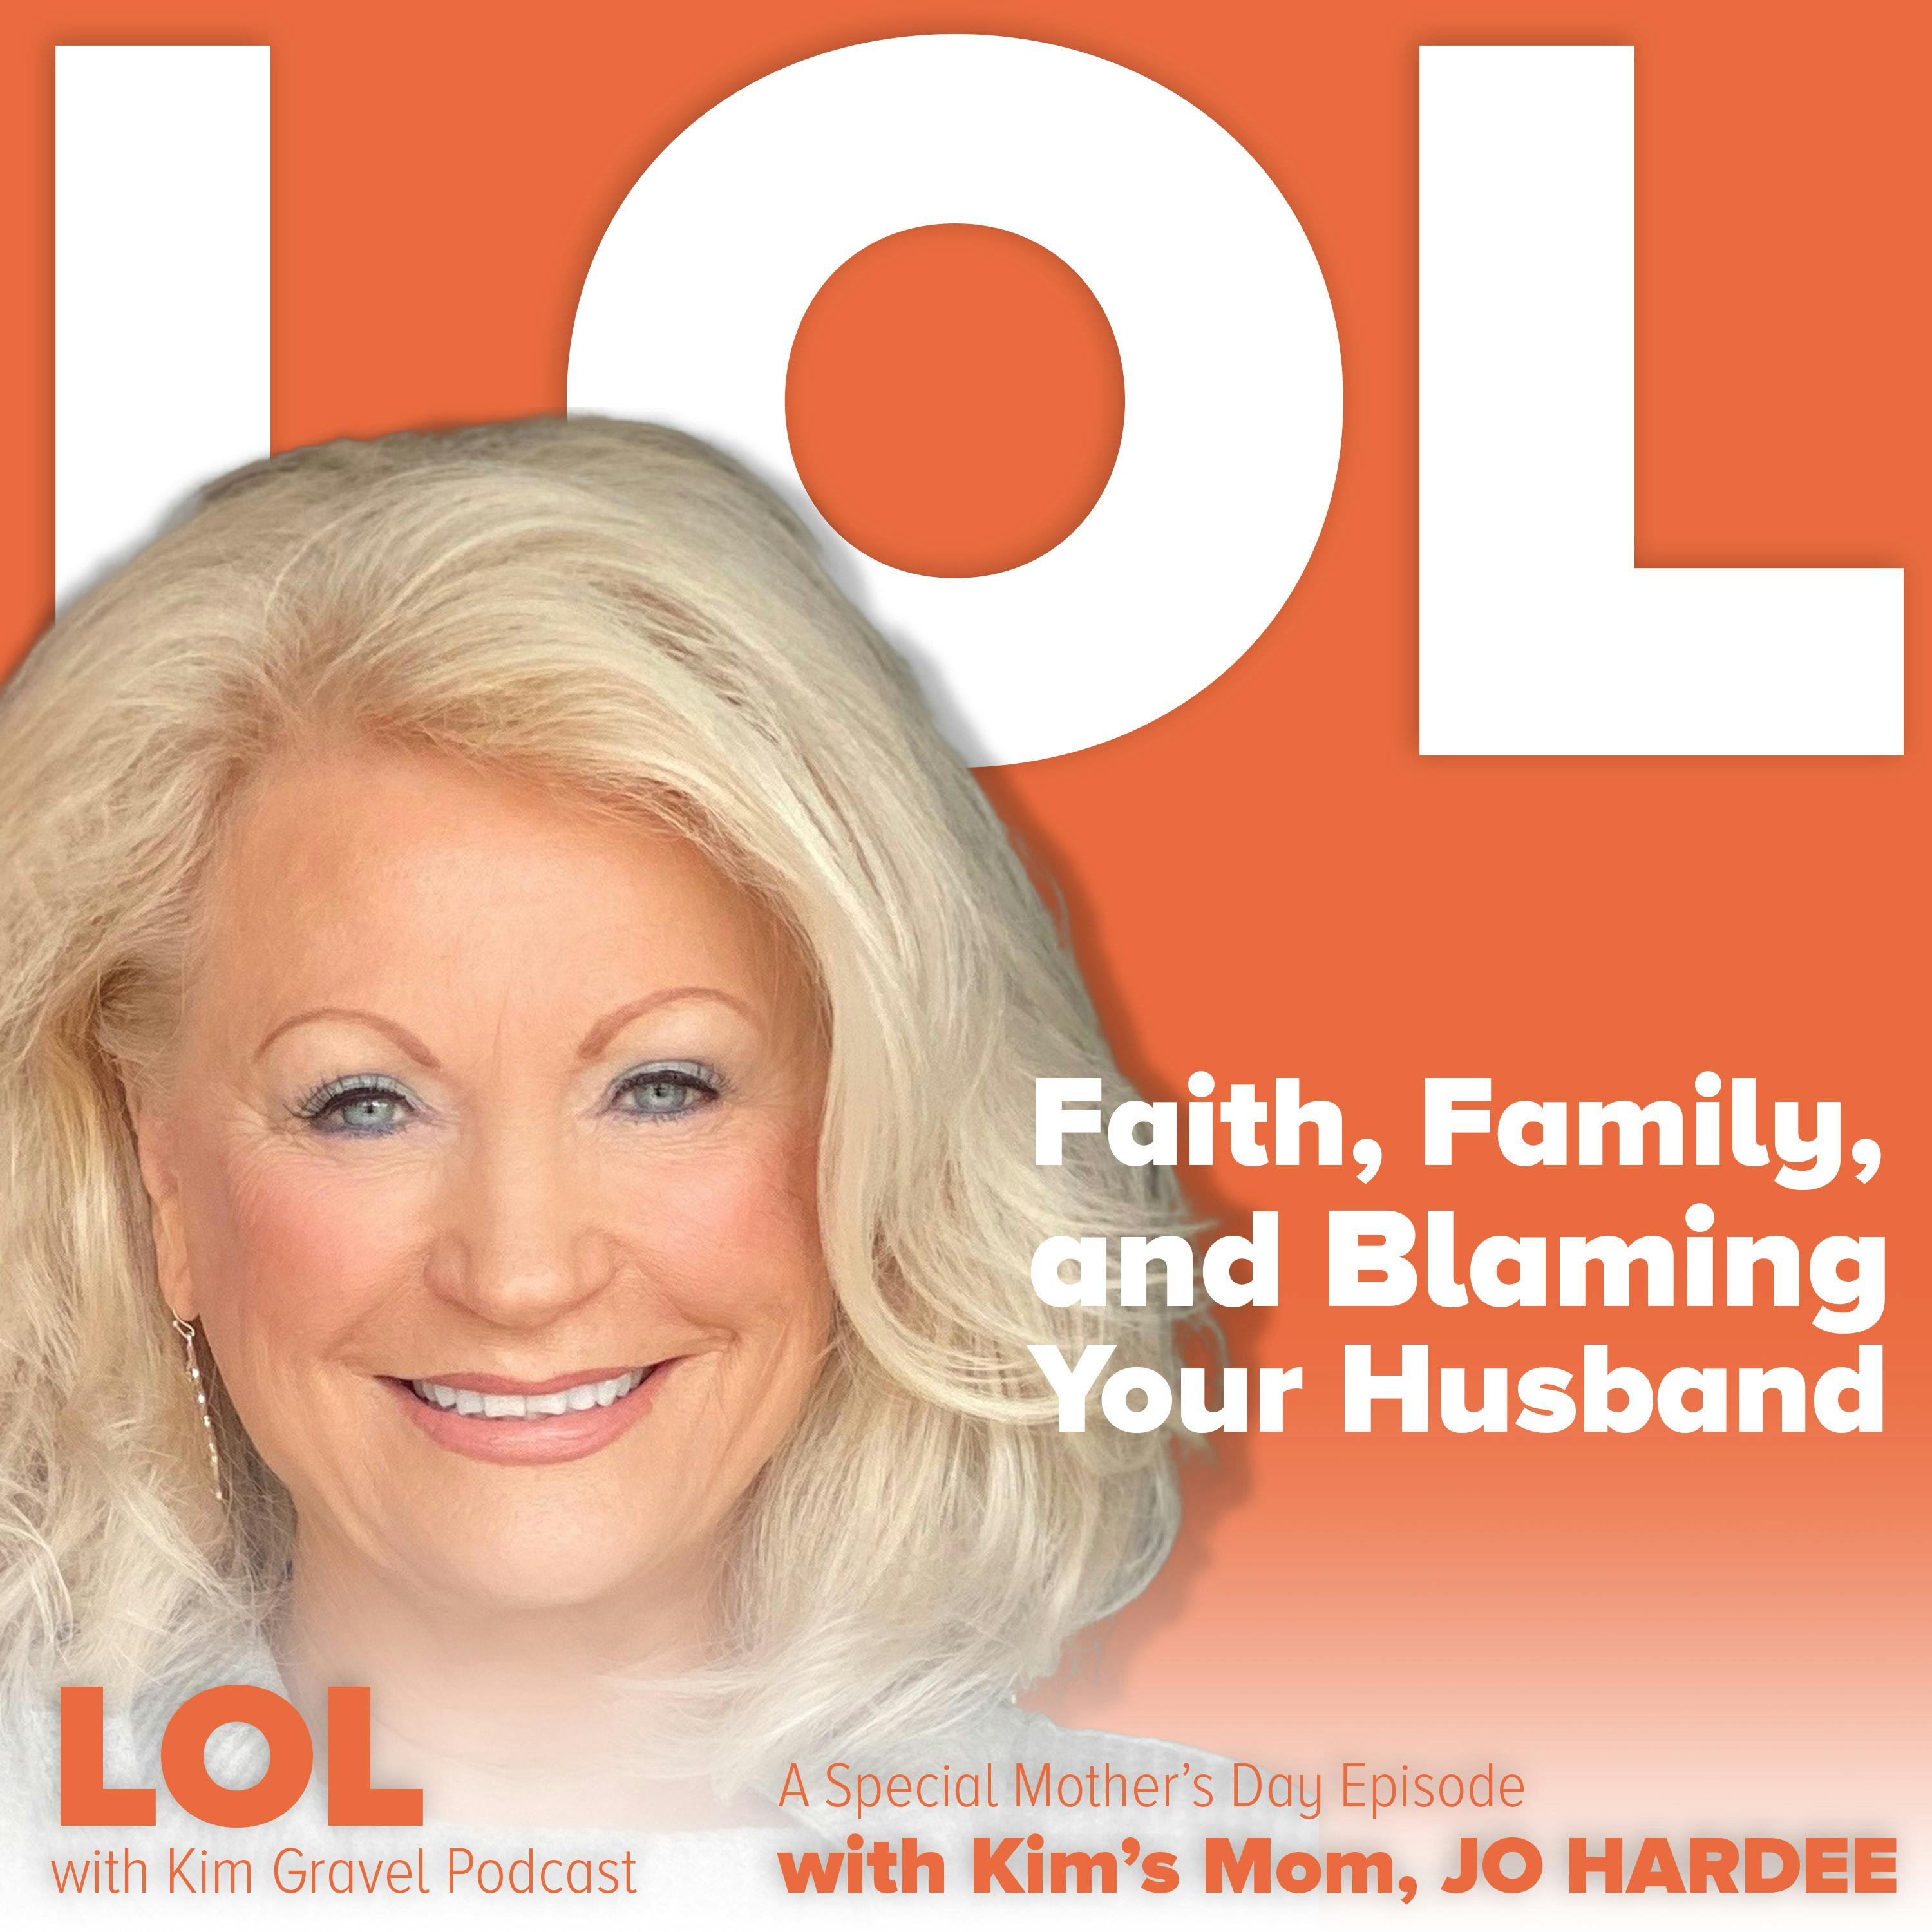 Faith, Family and Blaming Your Husband | A Special Mother’s Day Episode with Kim’s Mom, Jo Hardee Image